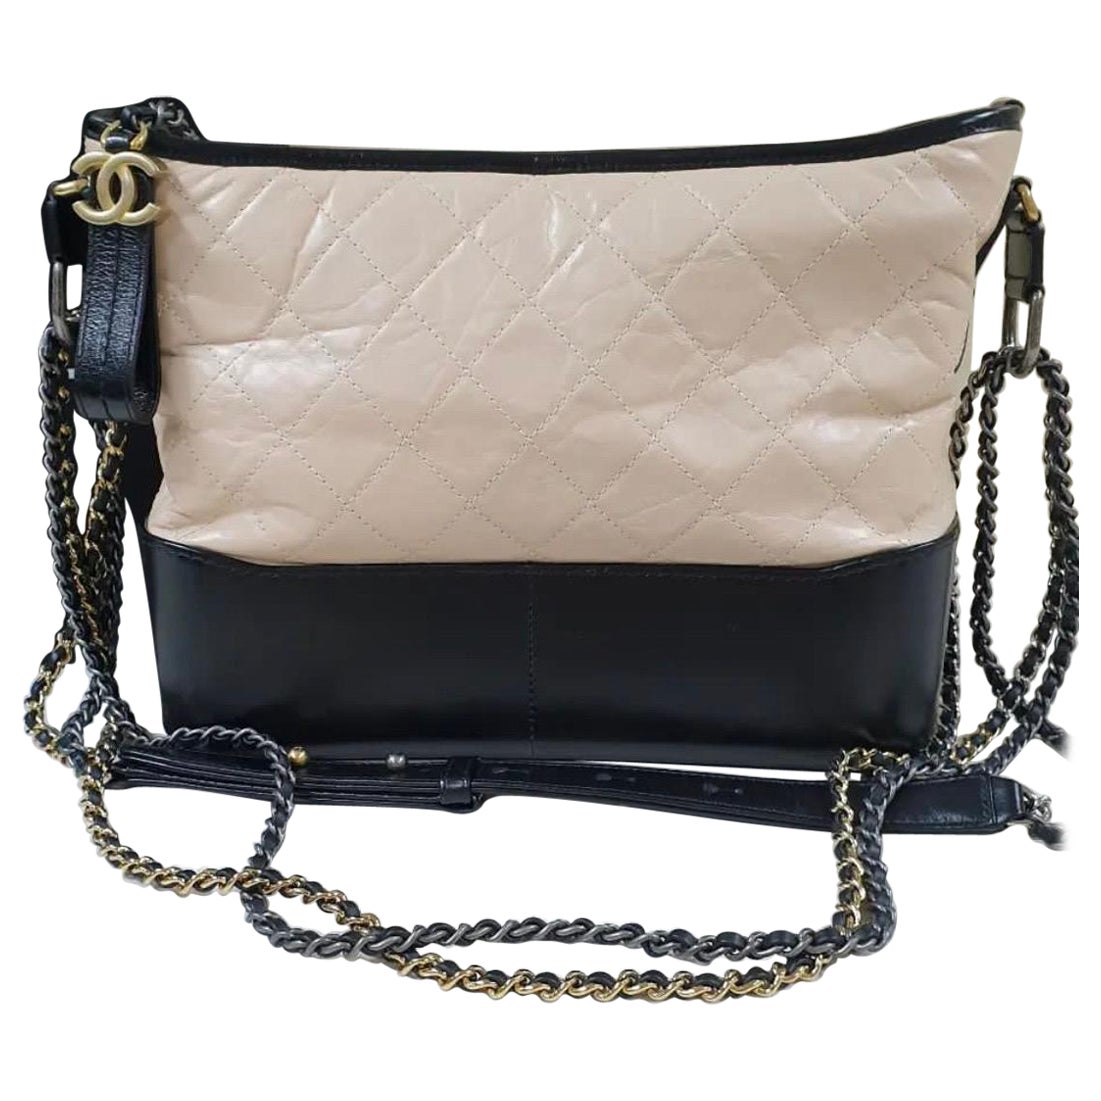 Chanel Gabrielle Quilted Aged Calfskin Beige Black Hobo Bag at